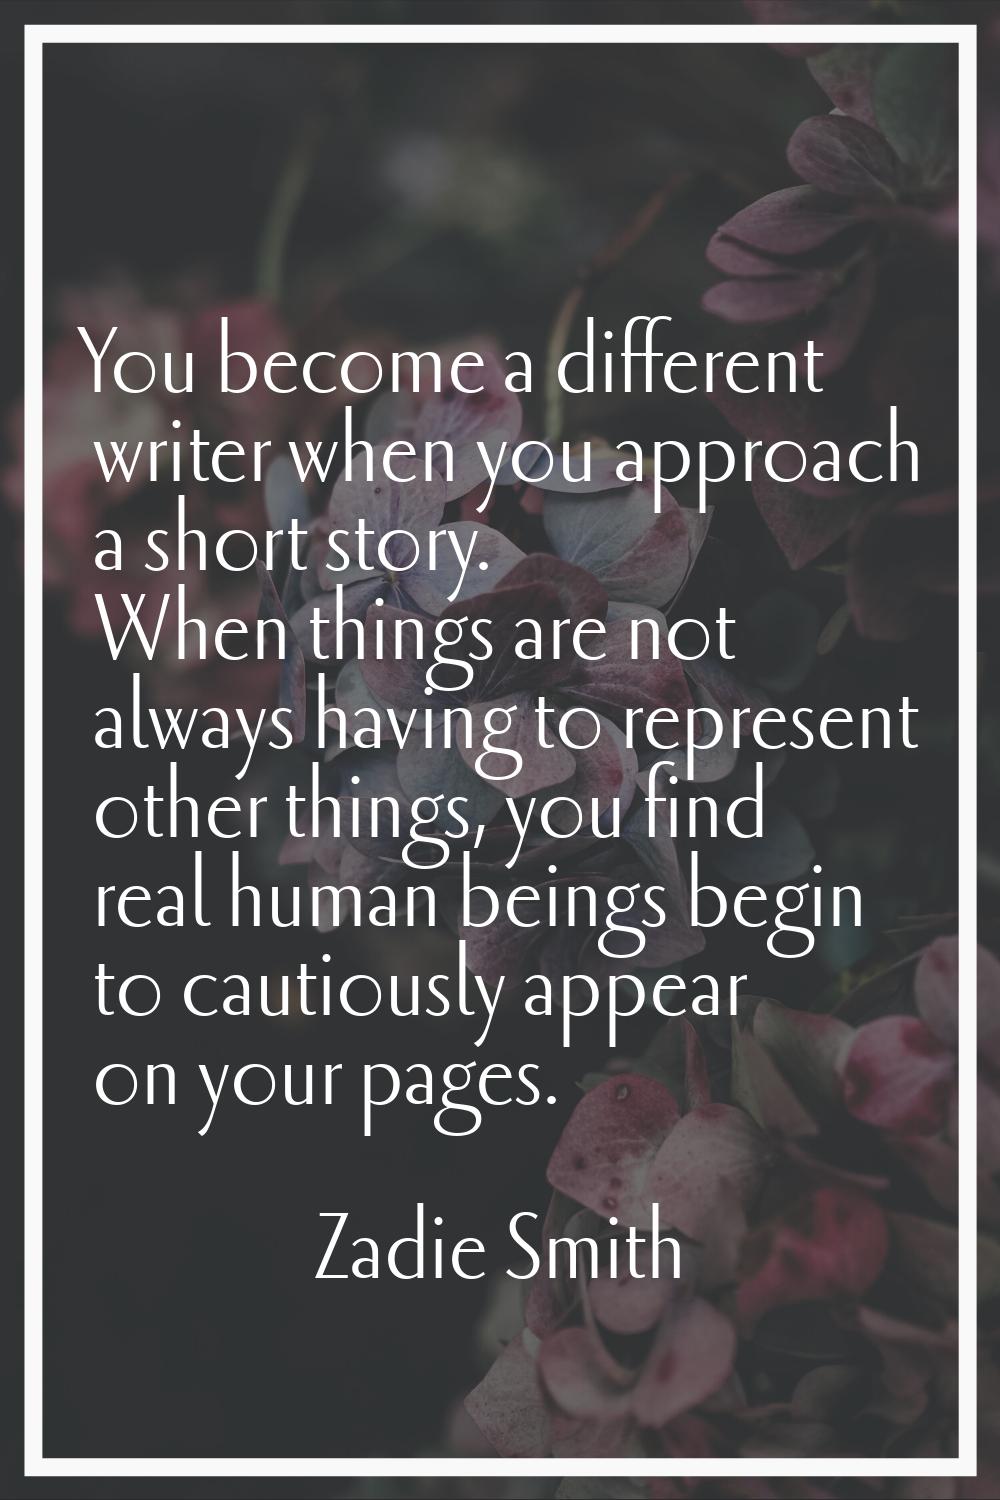 You become a different writer when you approach a short story. When things are not always having to